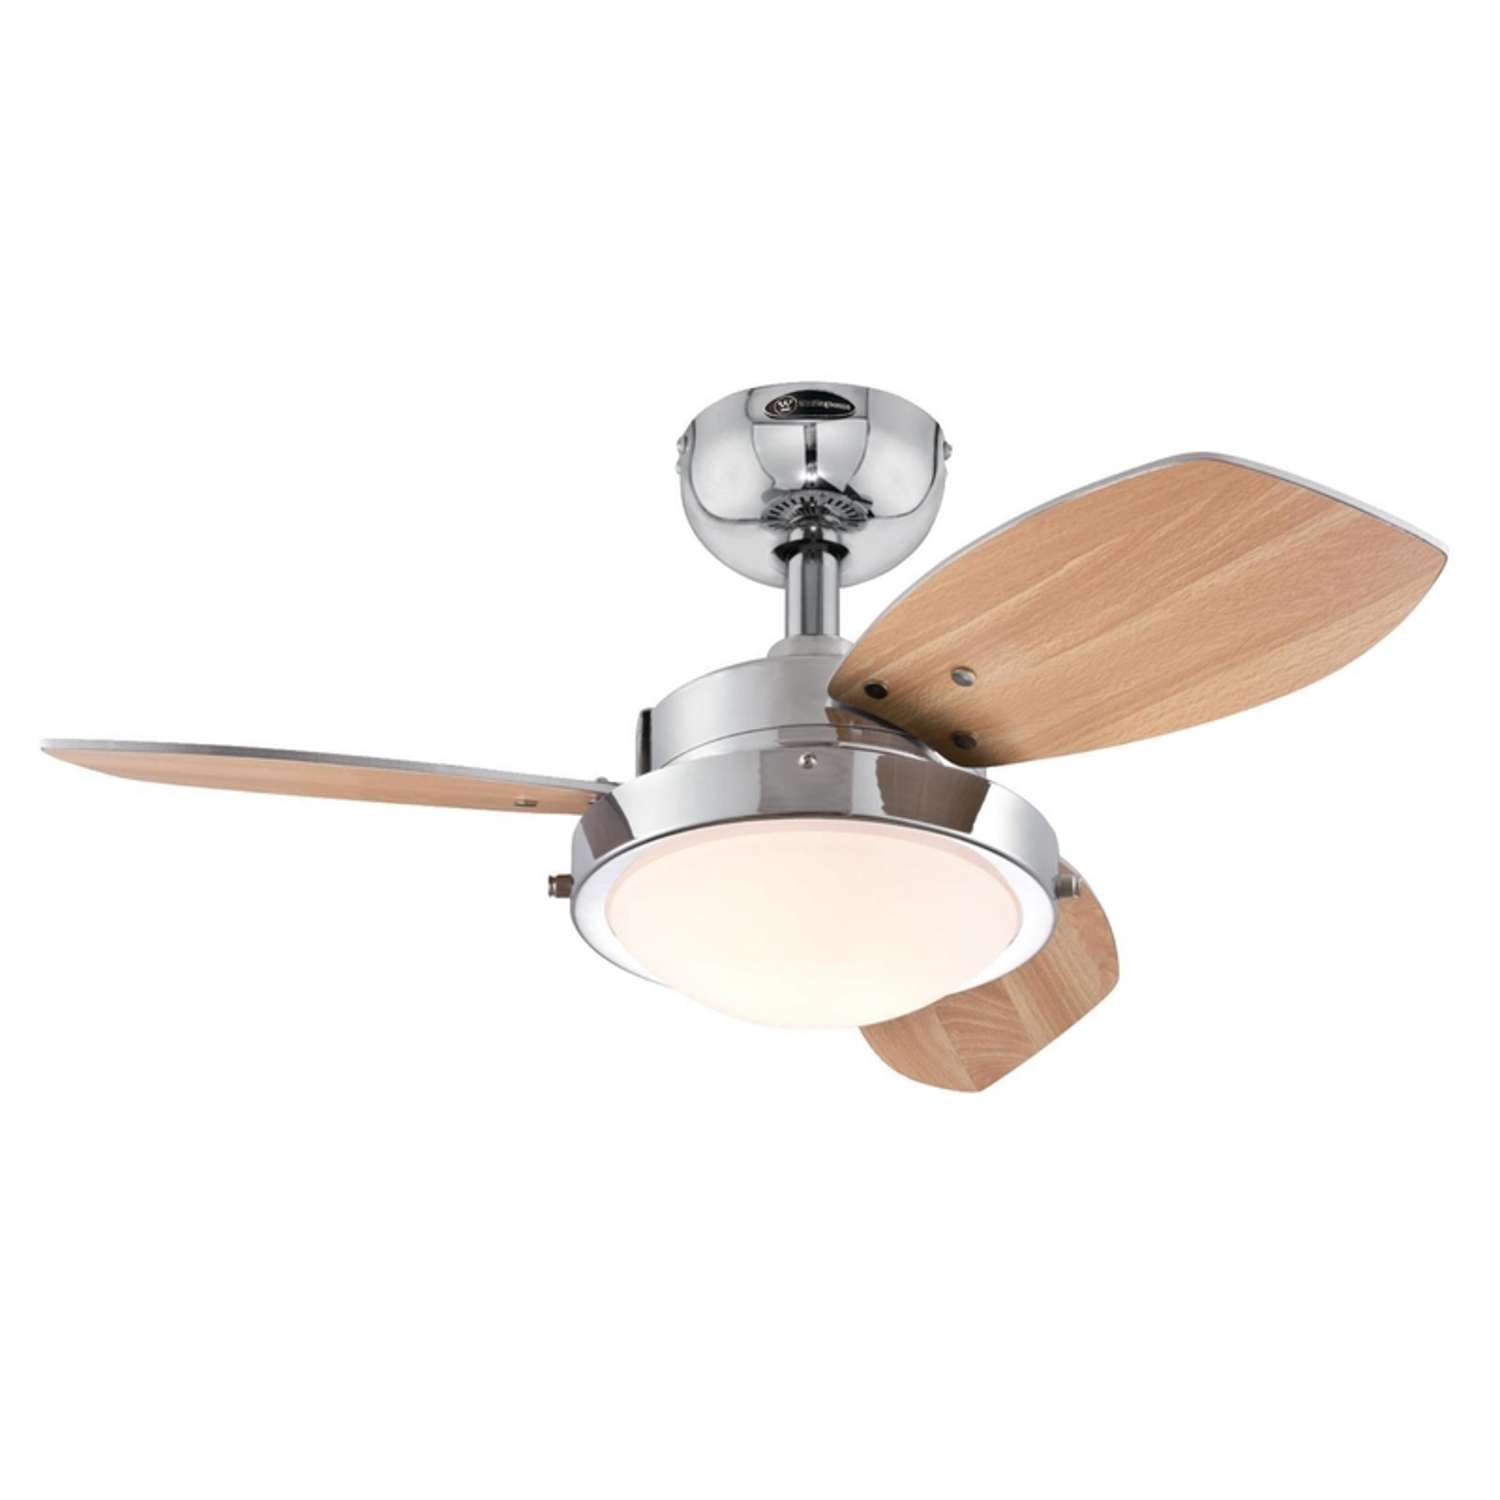 Westinghouse Lighting Ceiling Fan and Light Remote Control, Backlit Display  Panel, Black Finish